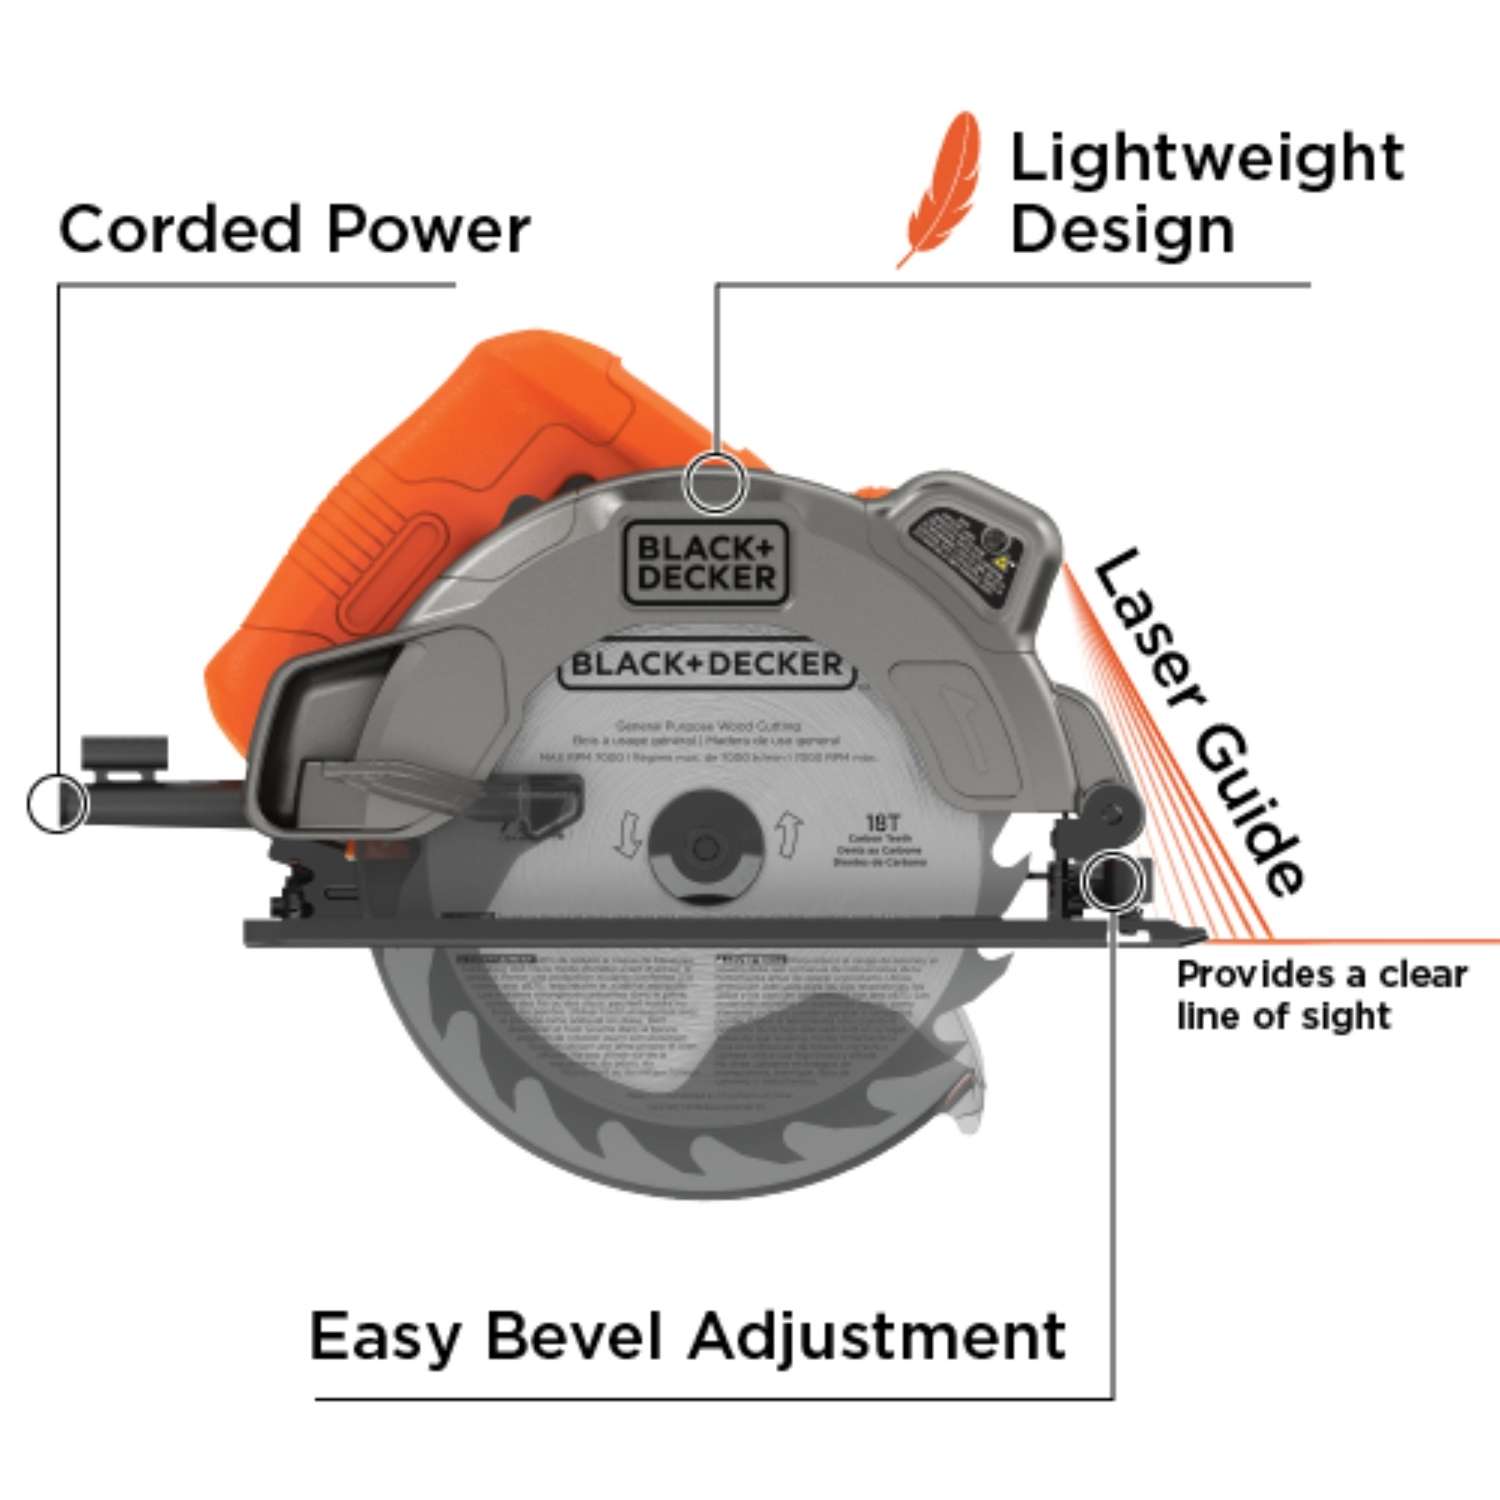 Black+Decker 13 amps 7-1/4 in. Corded Circular Saw with Laser Ace Hardware